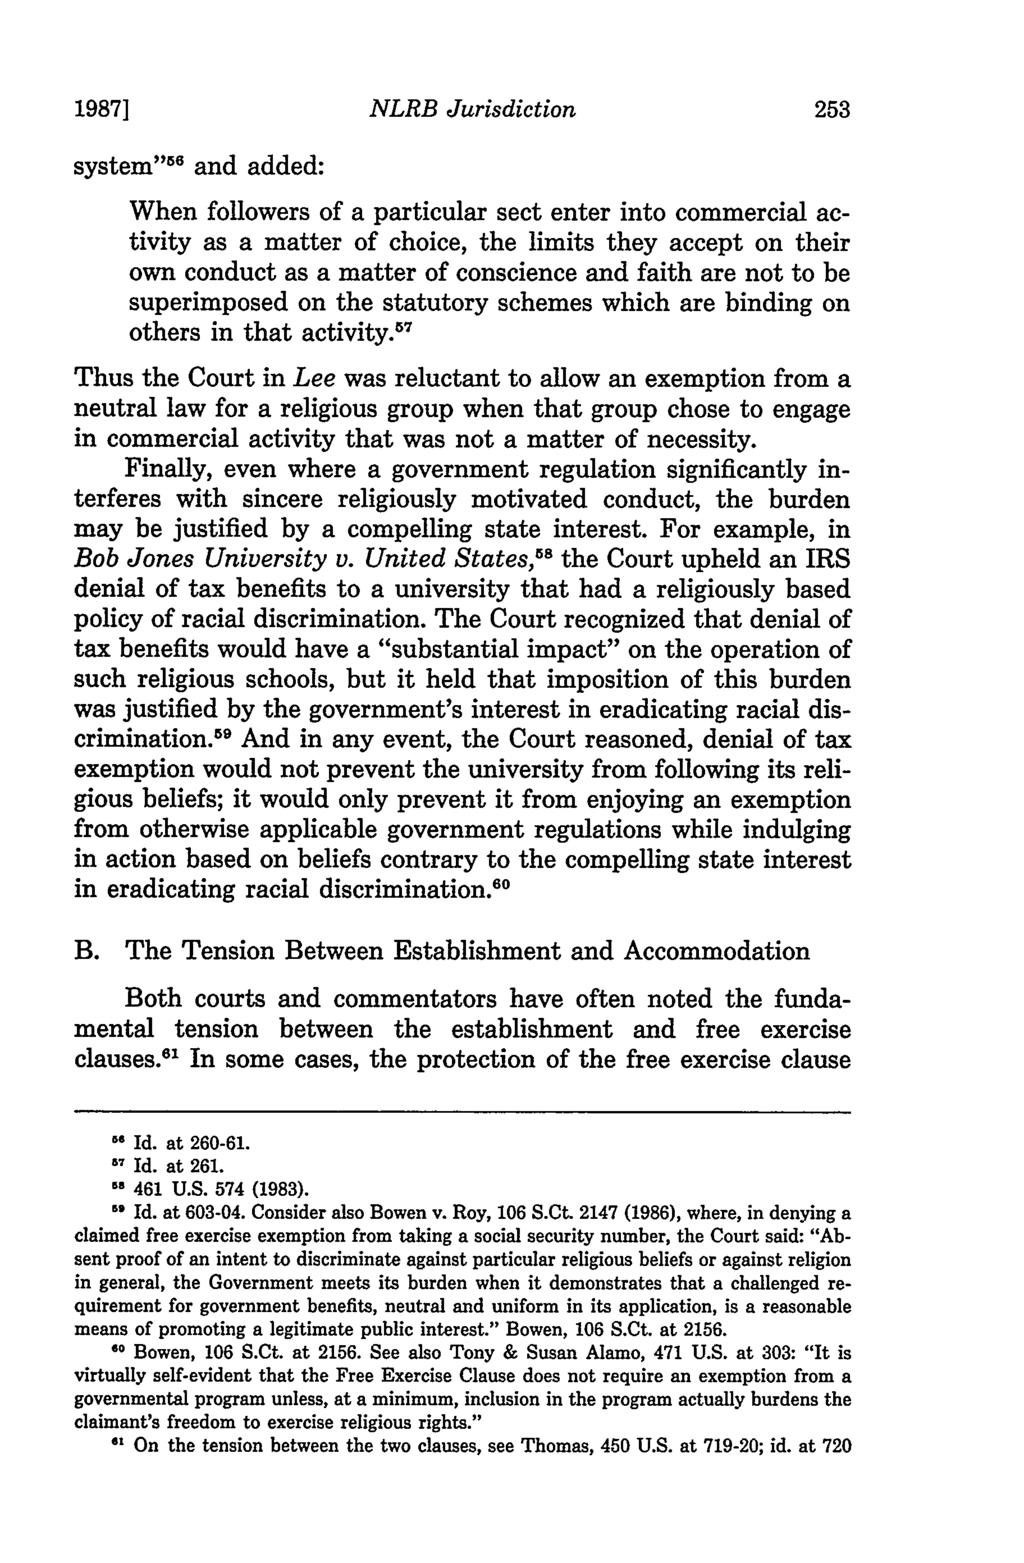 1987] NLRB Jurisdiction system" 5 and added: When followers of a particular sect enter into commercial activity as a matter of choice, the limits they accept on their own conduct as a matter of